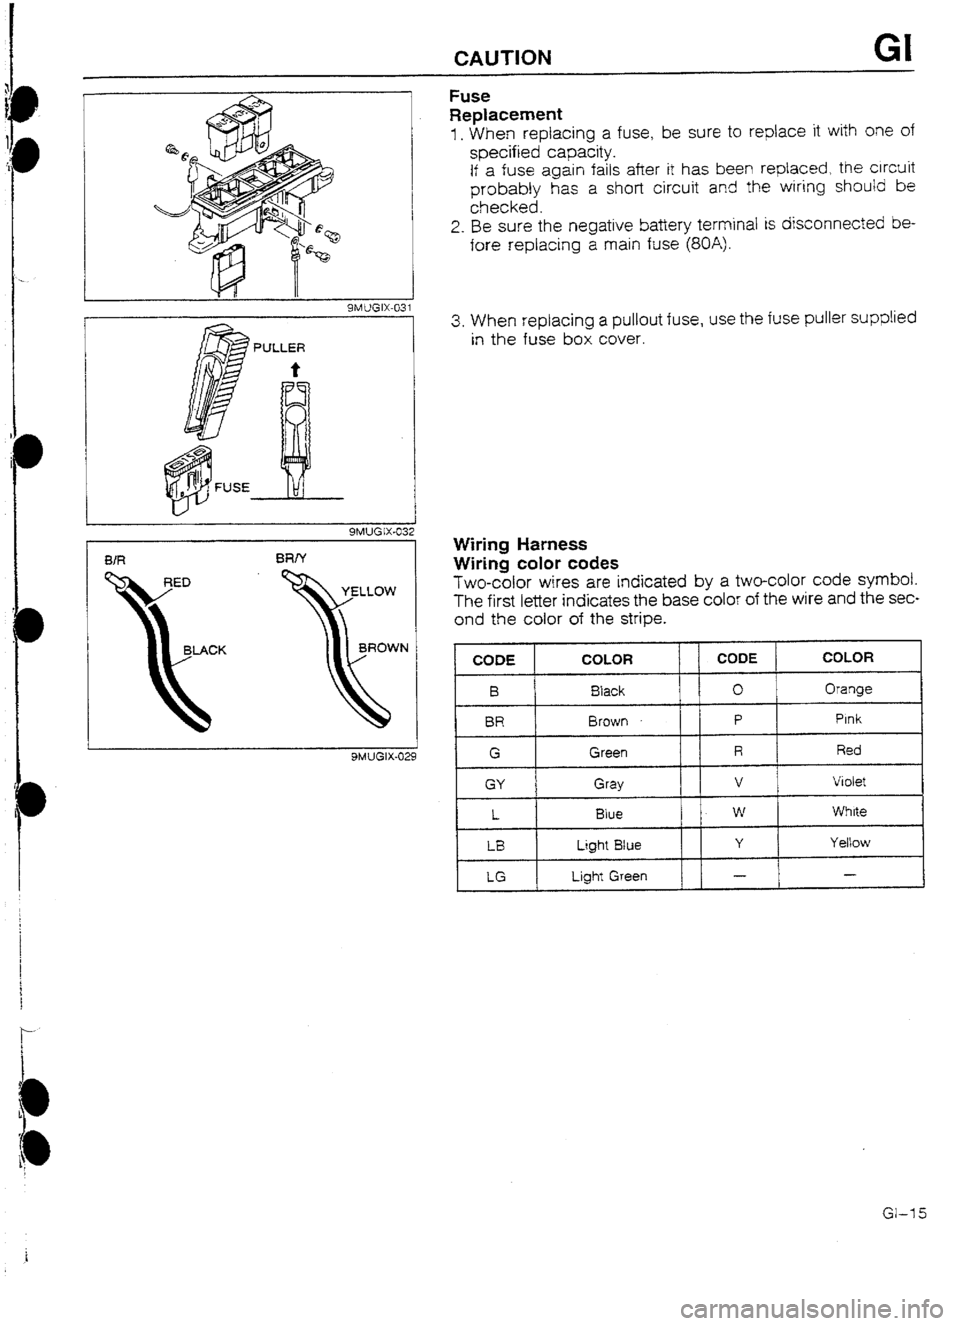 MAZDA 232 1990  Workshop Manual Suplement CAUTION GI 
I 9MUGIX-031 
PULLER 
t Fuse 
Replacement 
1. When replacing a fuse, be sure to replace it with one of 
specified capacity. 
If a fuse again fails after it has been reptaced, the circuit 
